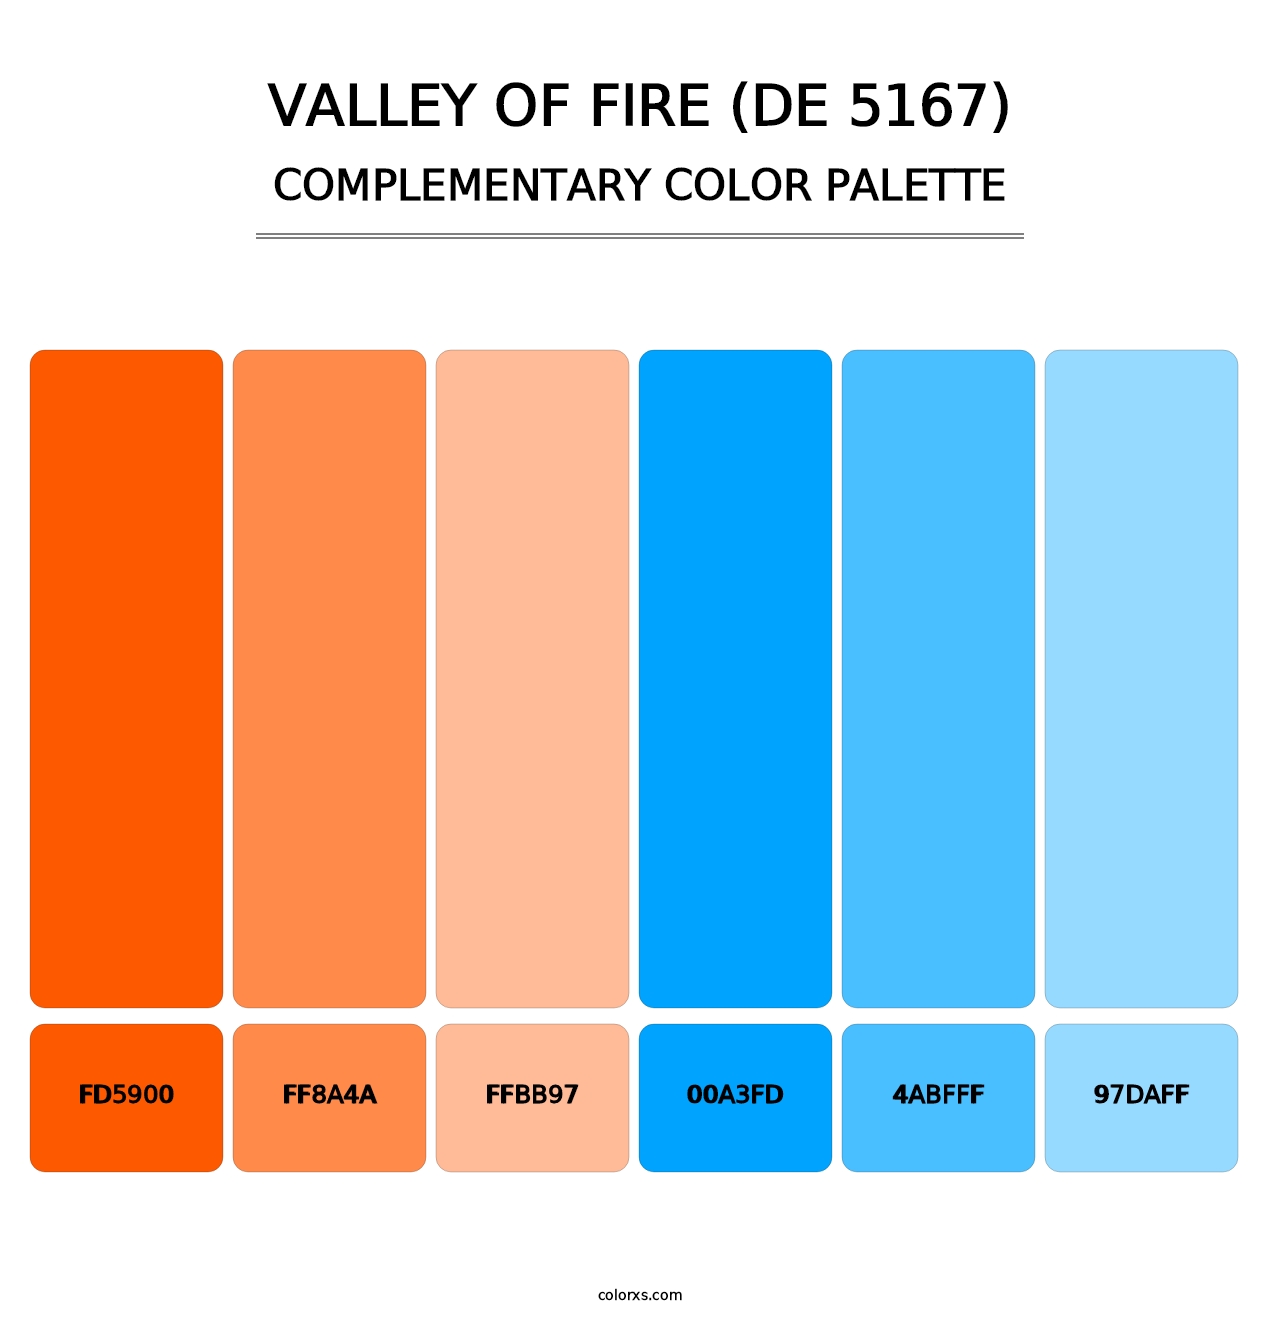 Valley of Fire (DE 5167) - Complementary Color Palette